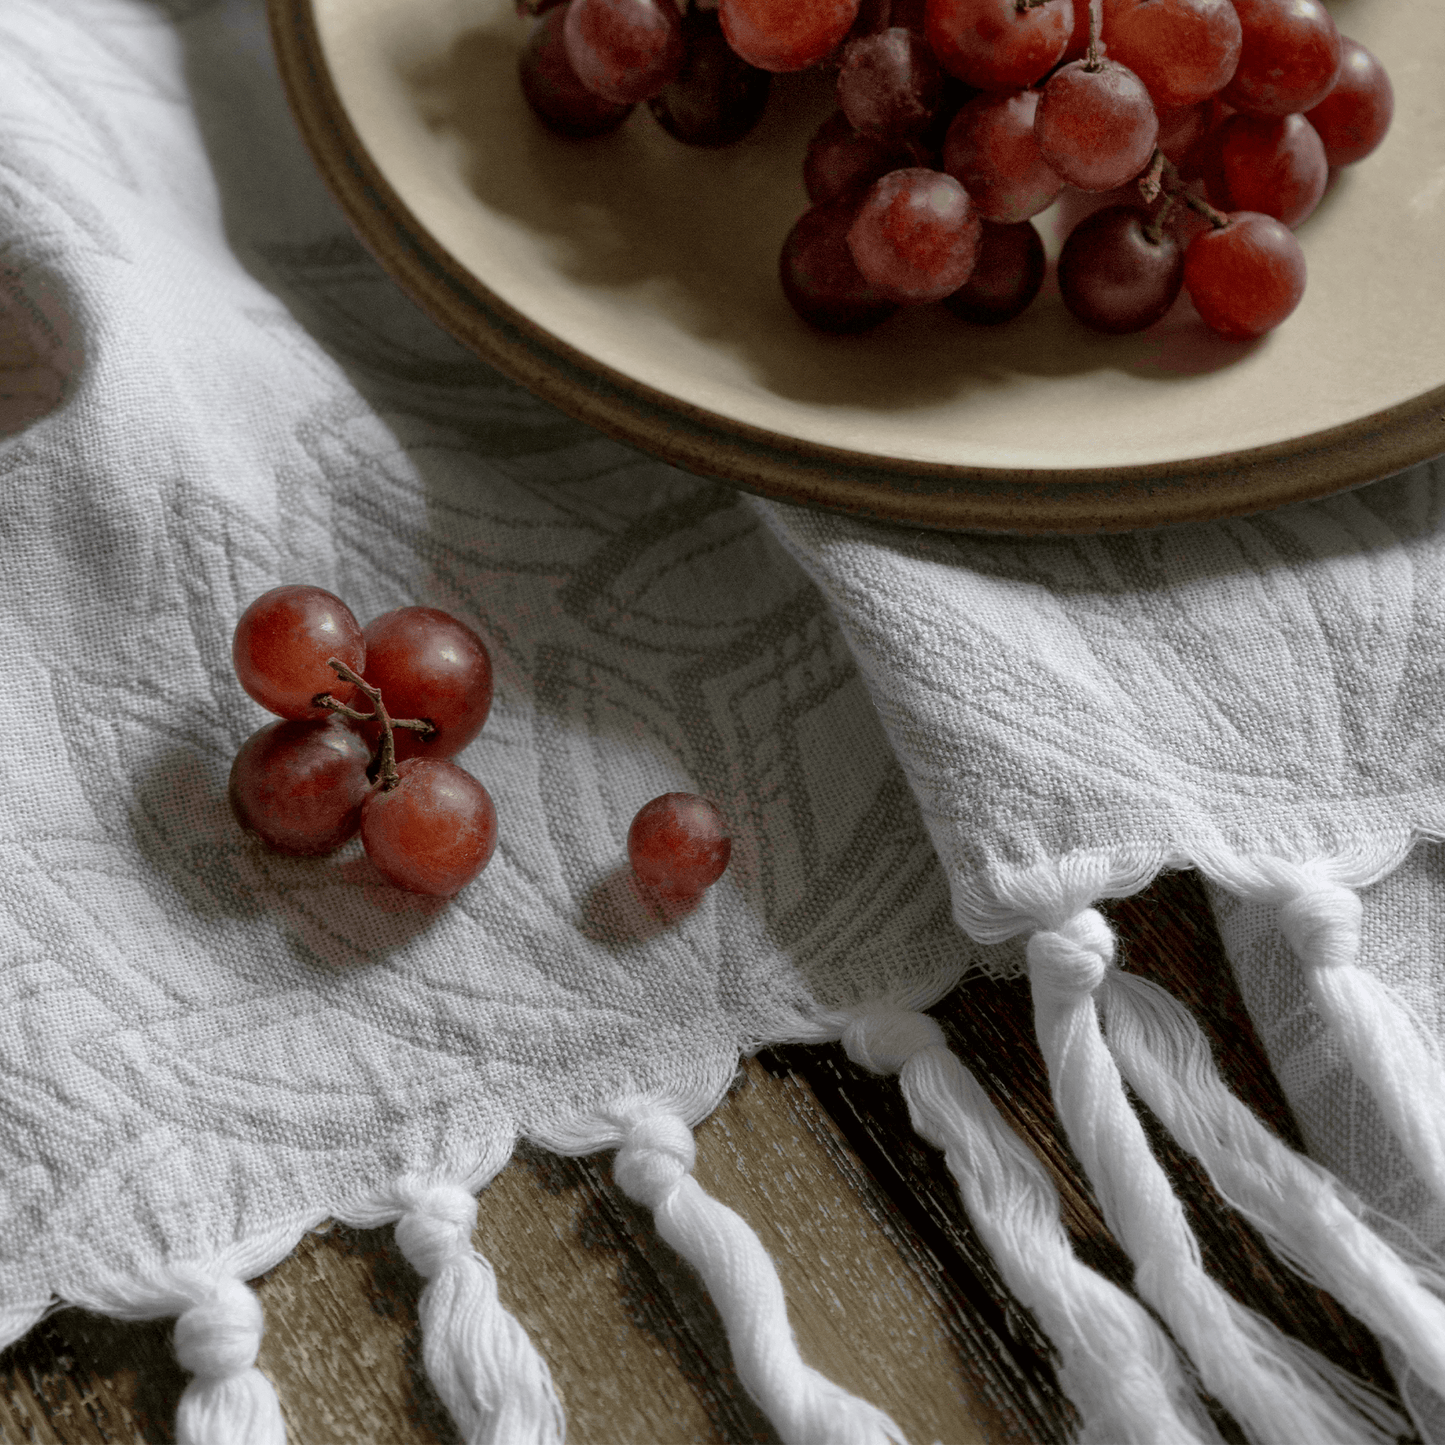 Grey and white Turkish hand towel with grapes in the kitchen